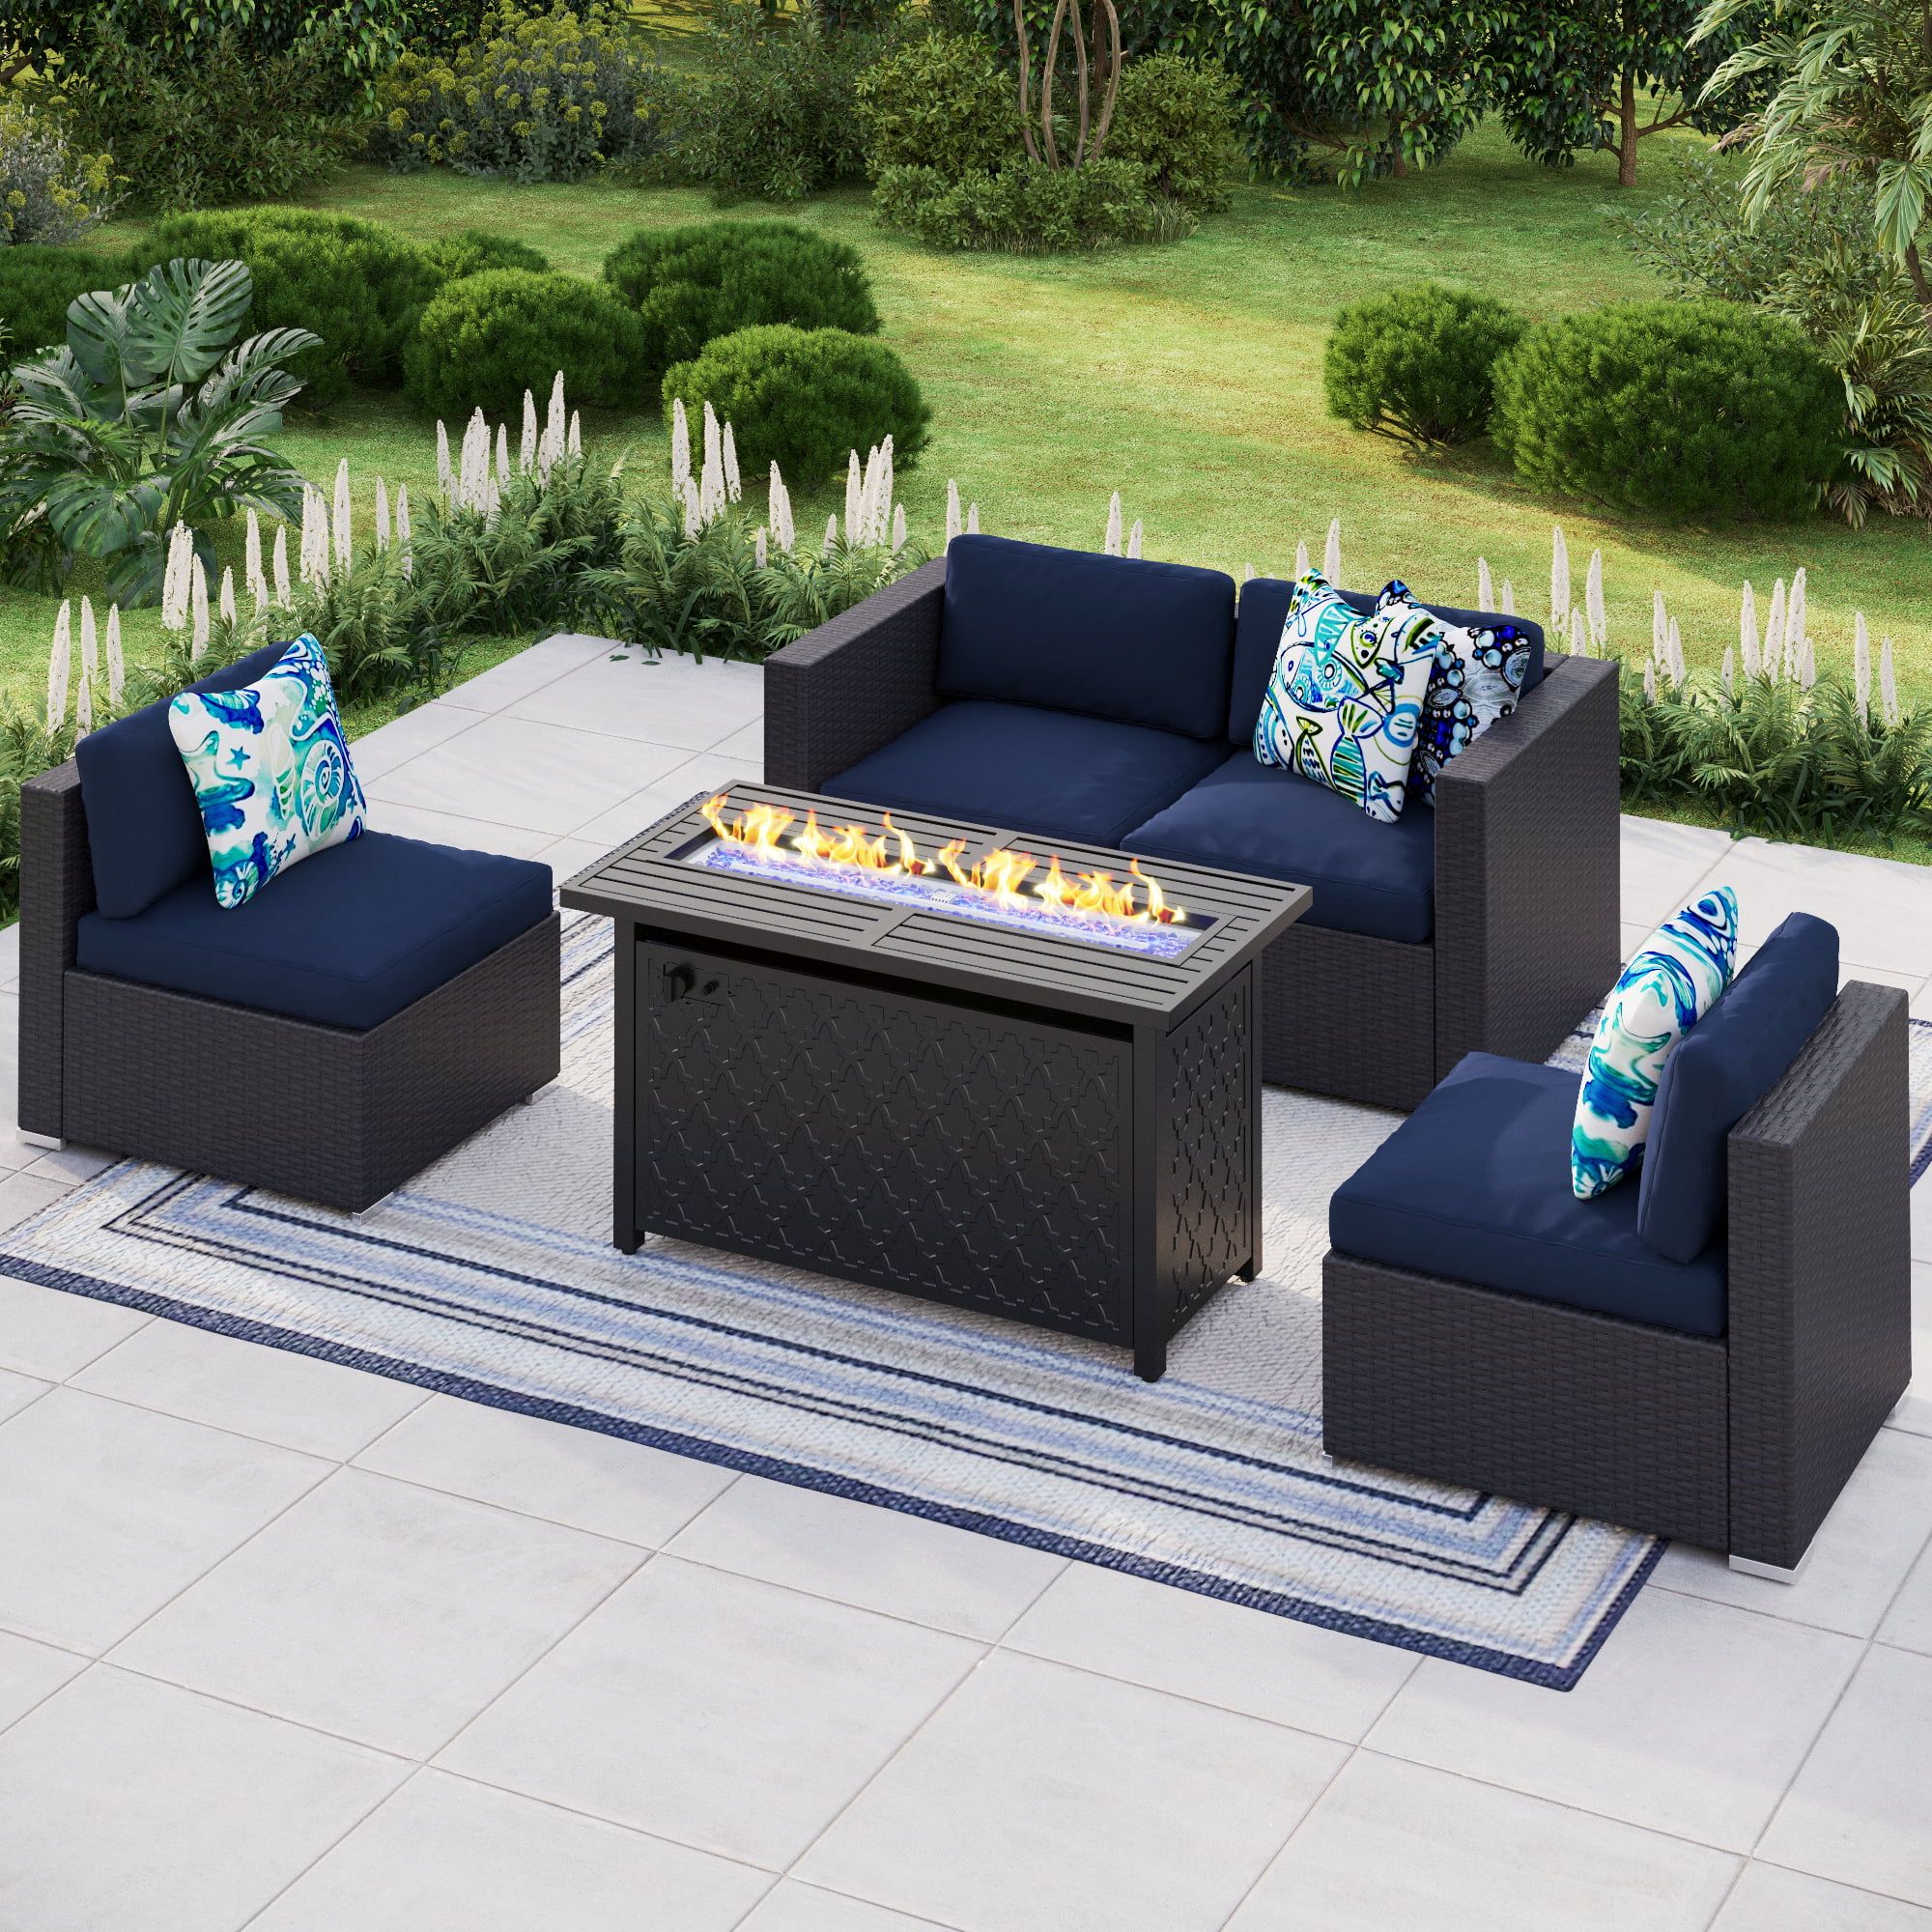 Fire Pit Table Wicker Sectional Sofa Conversation Set Inside Recent Mf Studio 5pcs Gas Fire Pit Table Set, 4pcs Patio Conversation Sets With 45  Inch Rectangular Outdoor Firepits, Bluel Fire Glass And Lid For Free, Black  – Walmart (Photo 9 of 15)